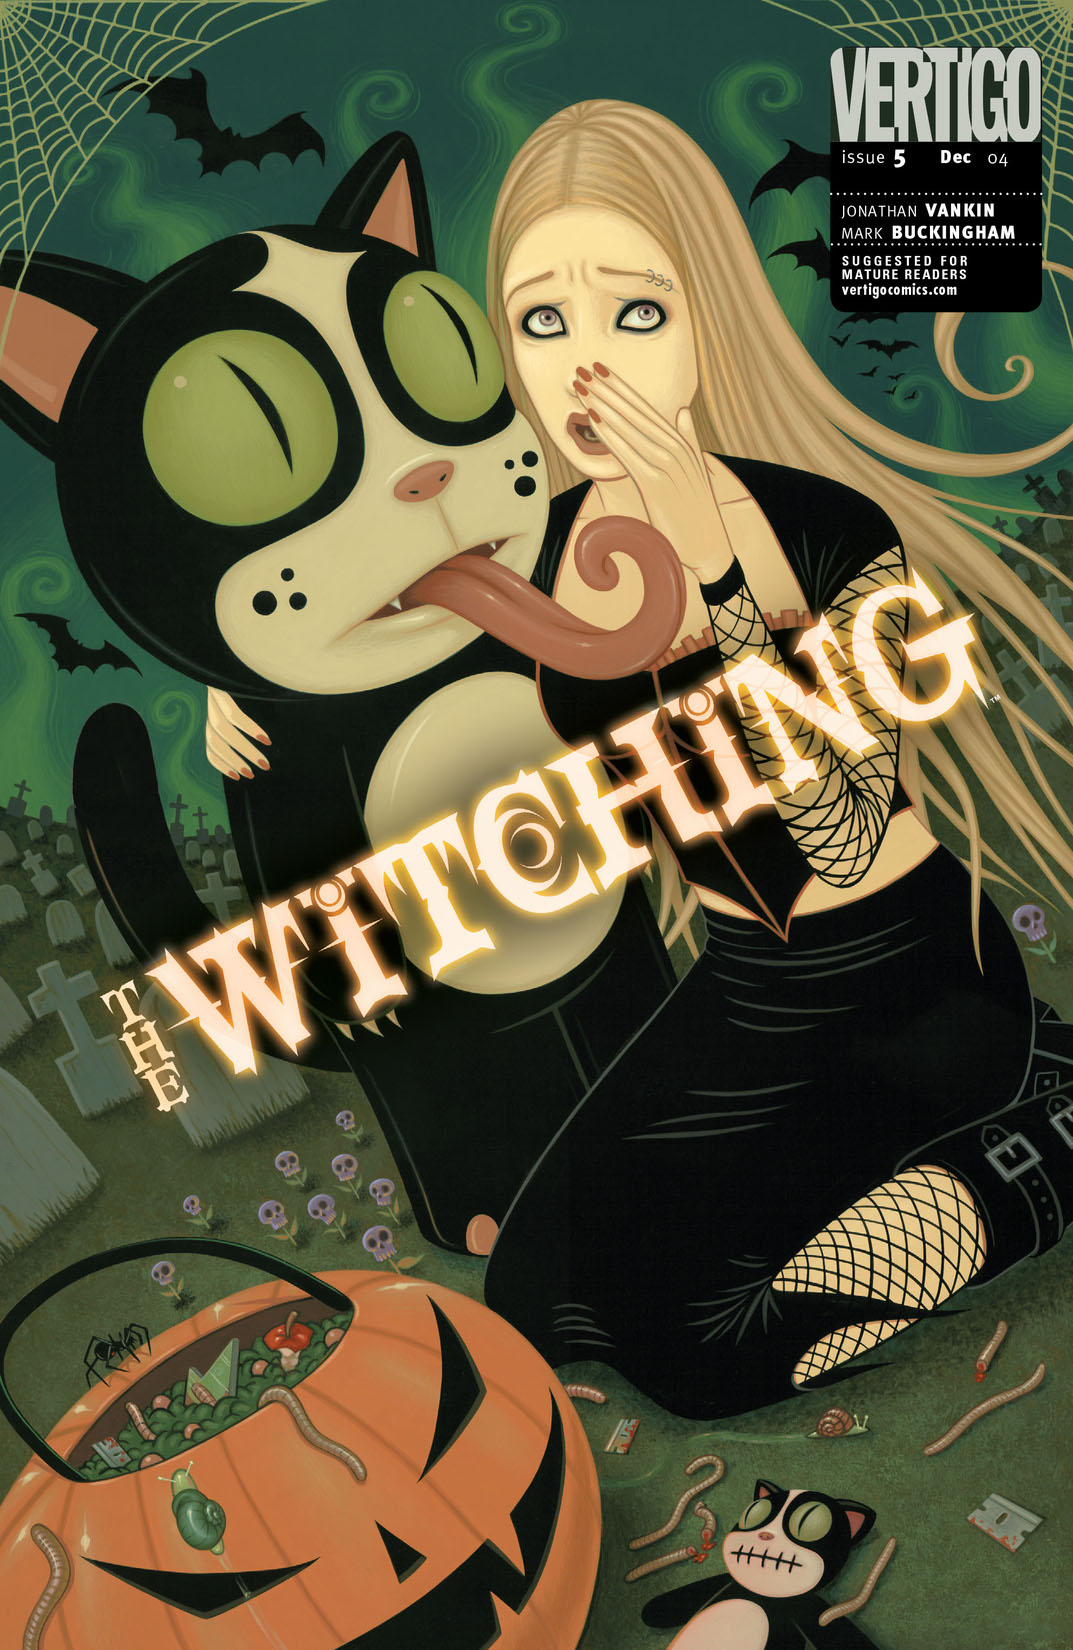 The Witching #5 preview images